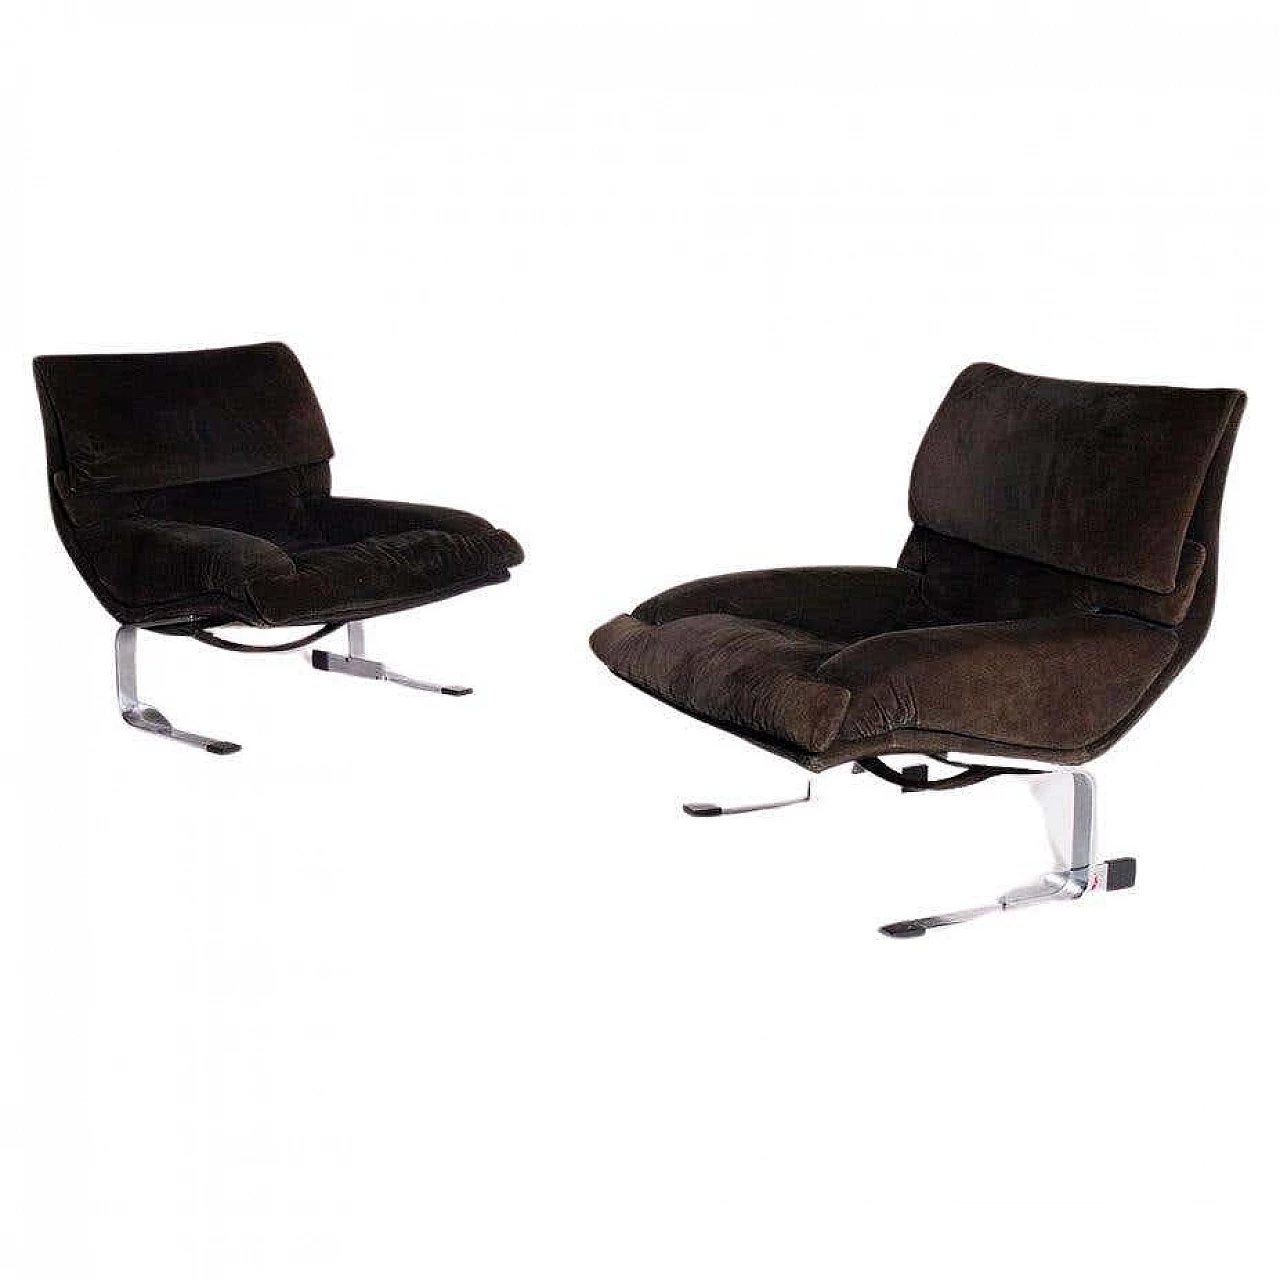 Pair of Onda armchairs by Giovanni Offredi for Saporiti, 1970s 1